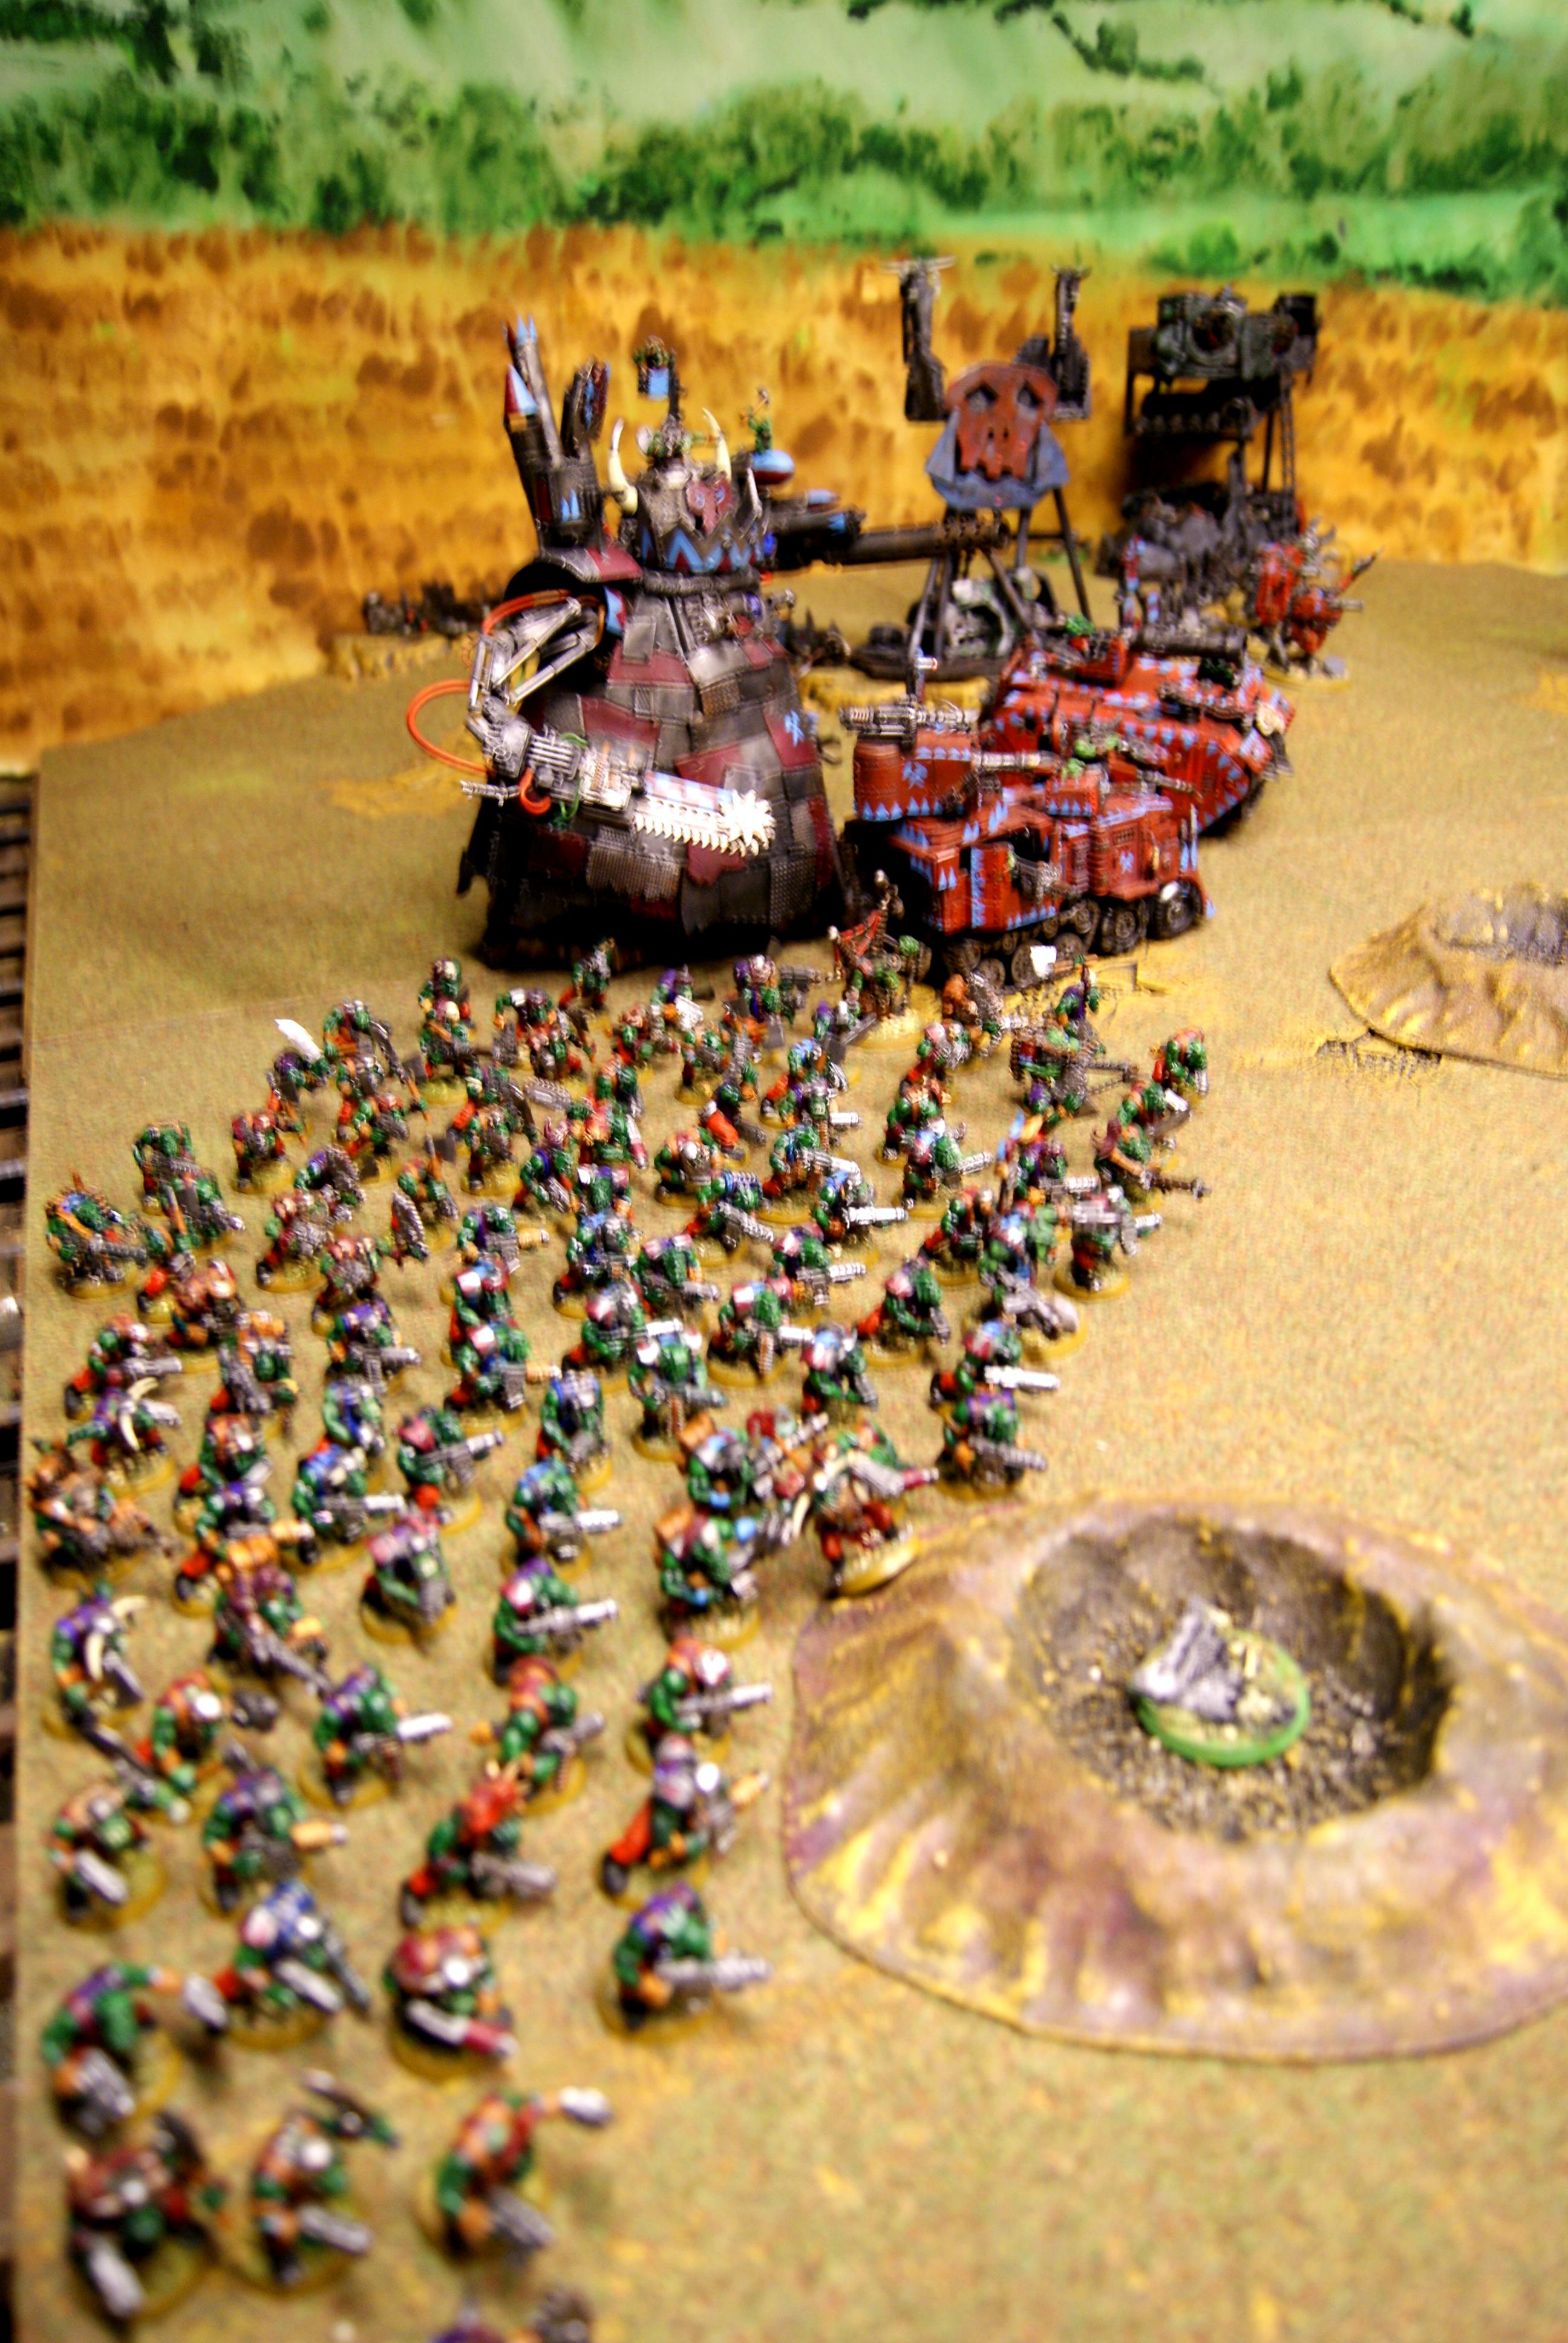 Apocalypse, Blurred Photo, Imperial Guard, Orks, Warhammer 40,000